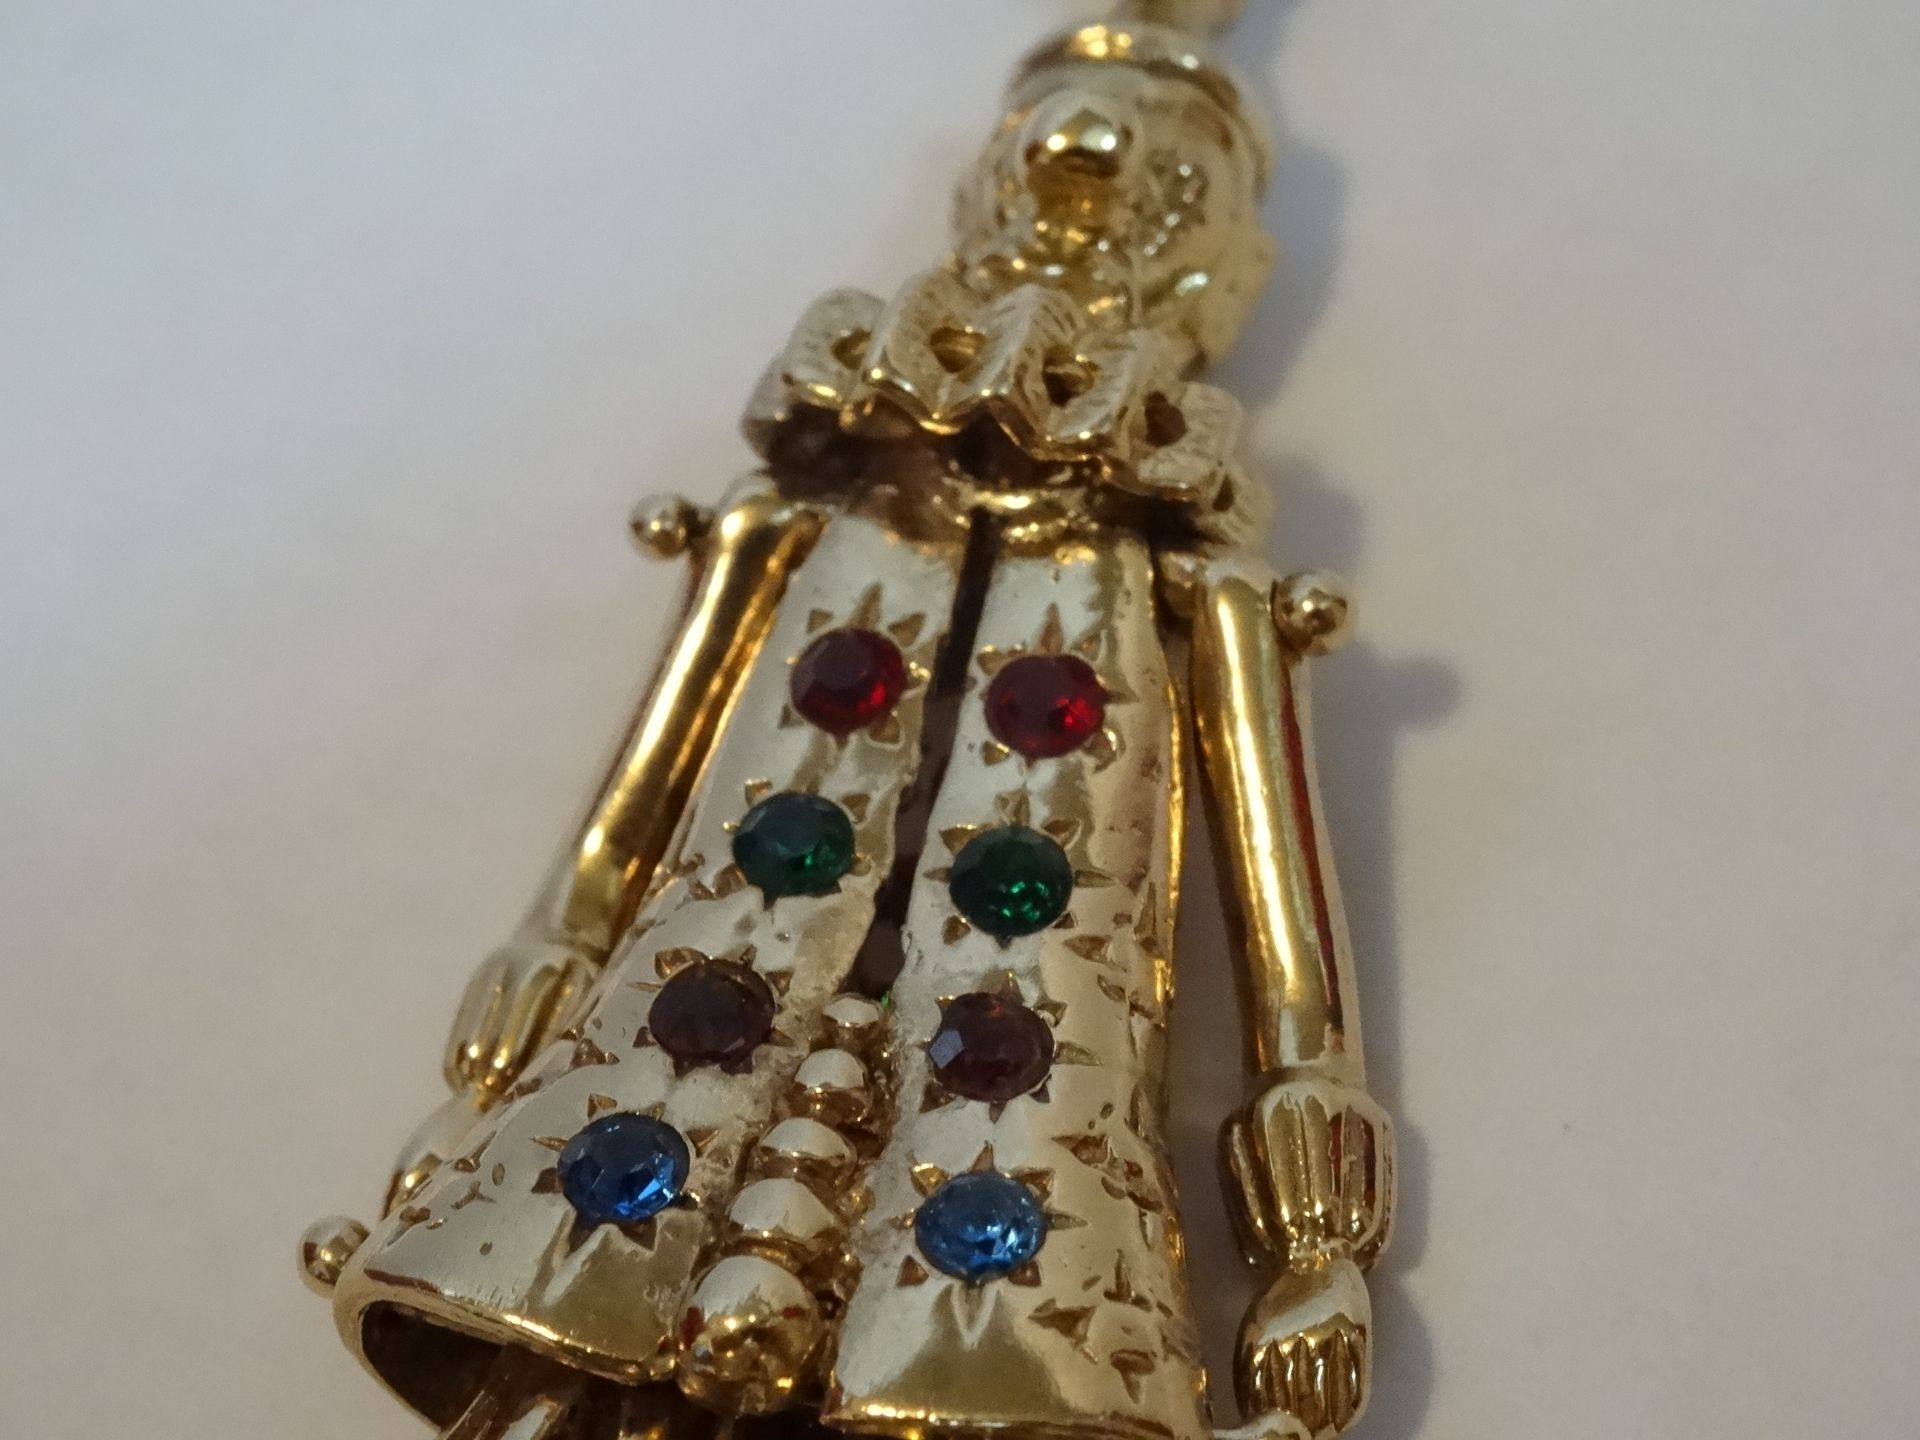 9 Carat Yellow Gold Curb Chain & Moveable Clown Pendant. - Image 4 of 6